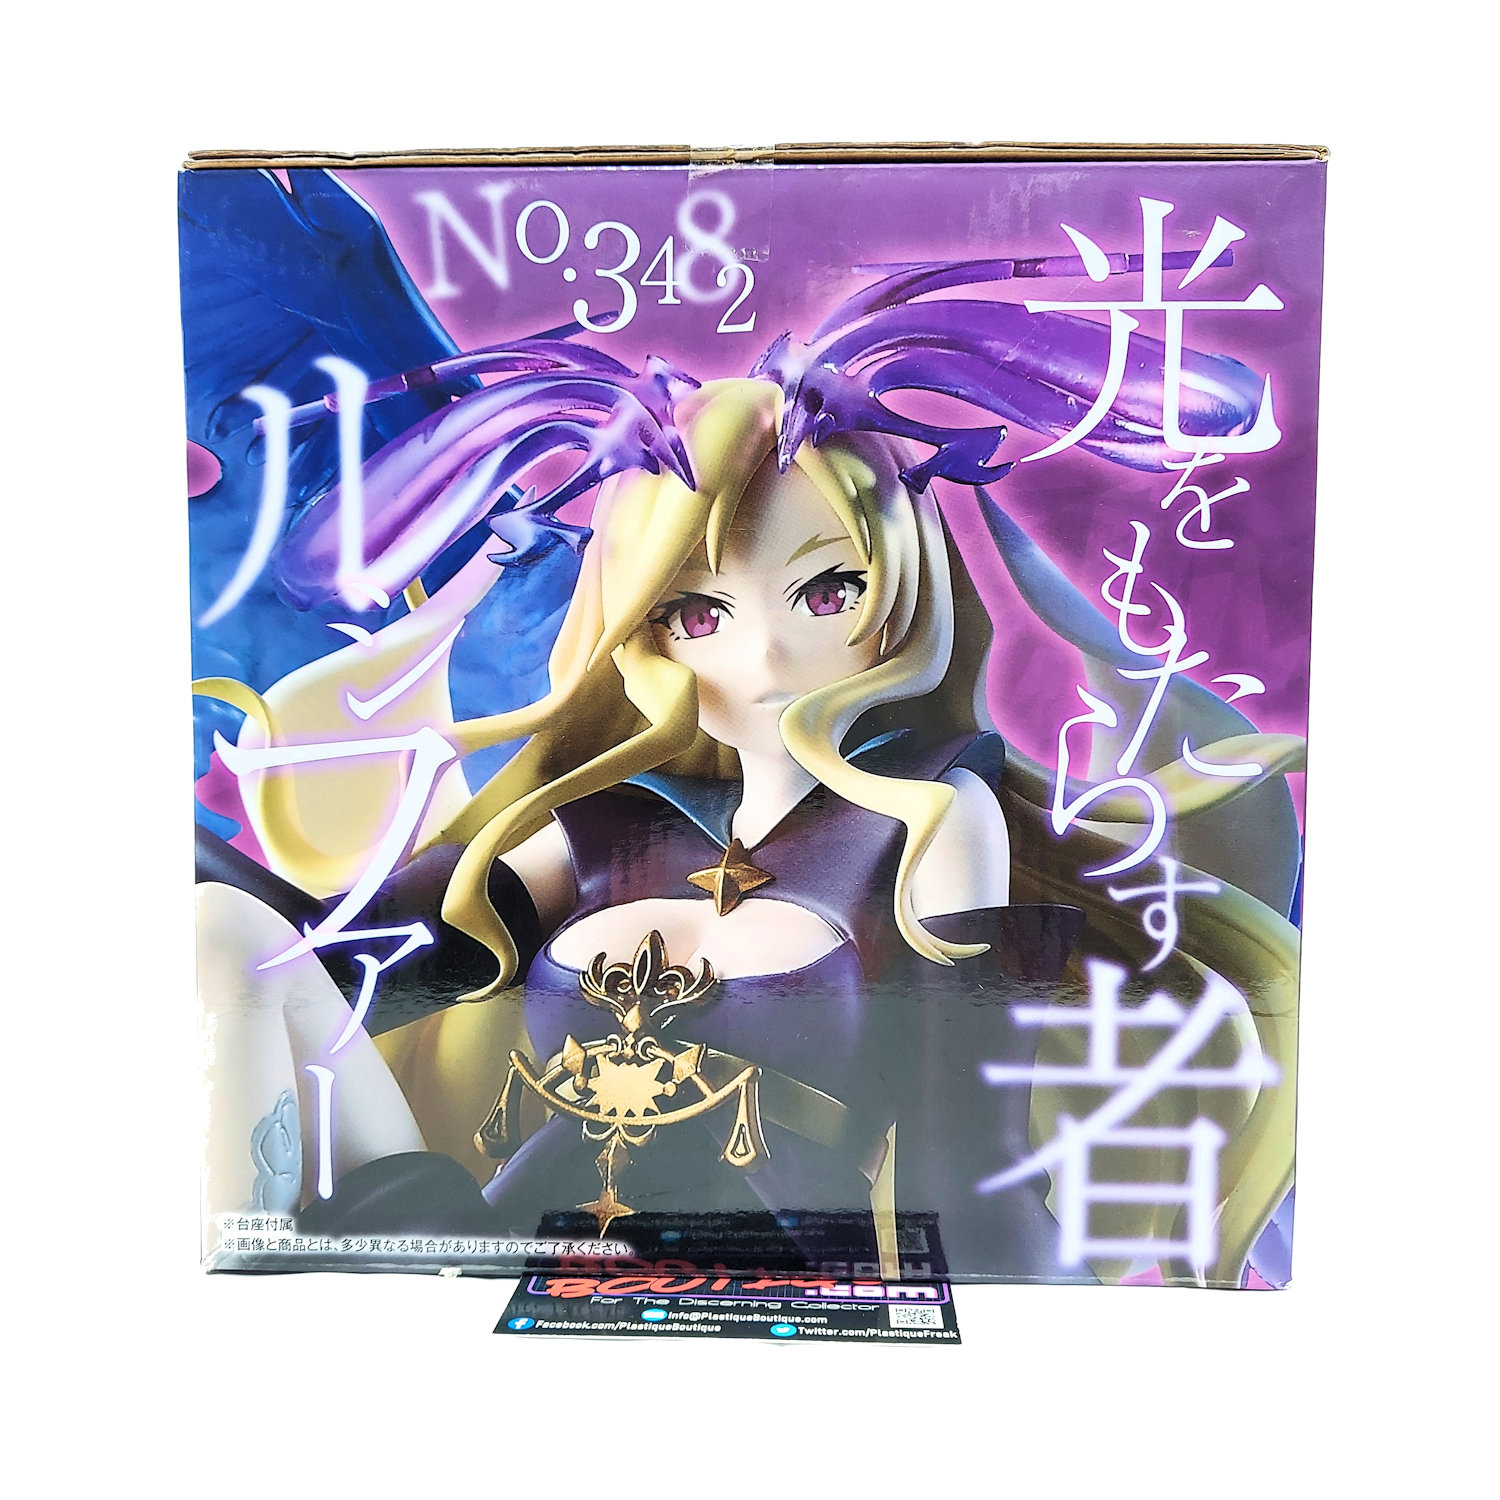 Monster Strike the Movie: Lucifer - Zetsubo no Yoake Mini Colored Paper  (Set of 8) (Anime Toy) - HobbySearch Anime Goods Store